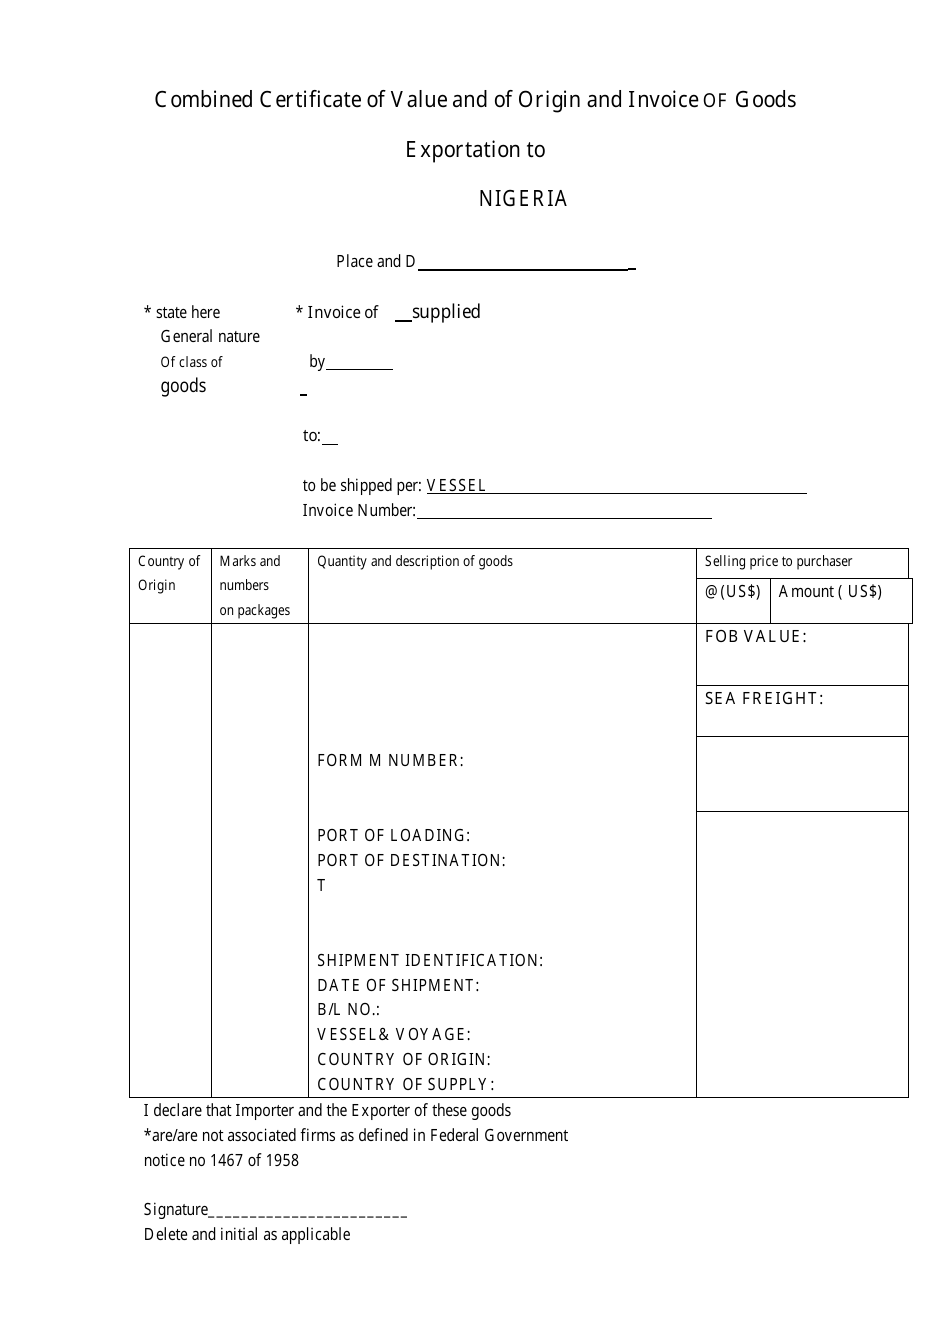 Combined Certificate of Value and of Origin and Invoice of Goods (Exportation to Nigeria), Page 1